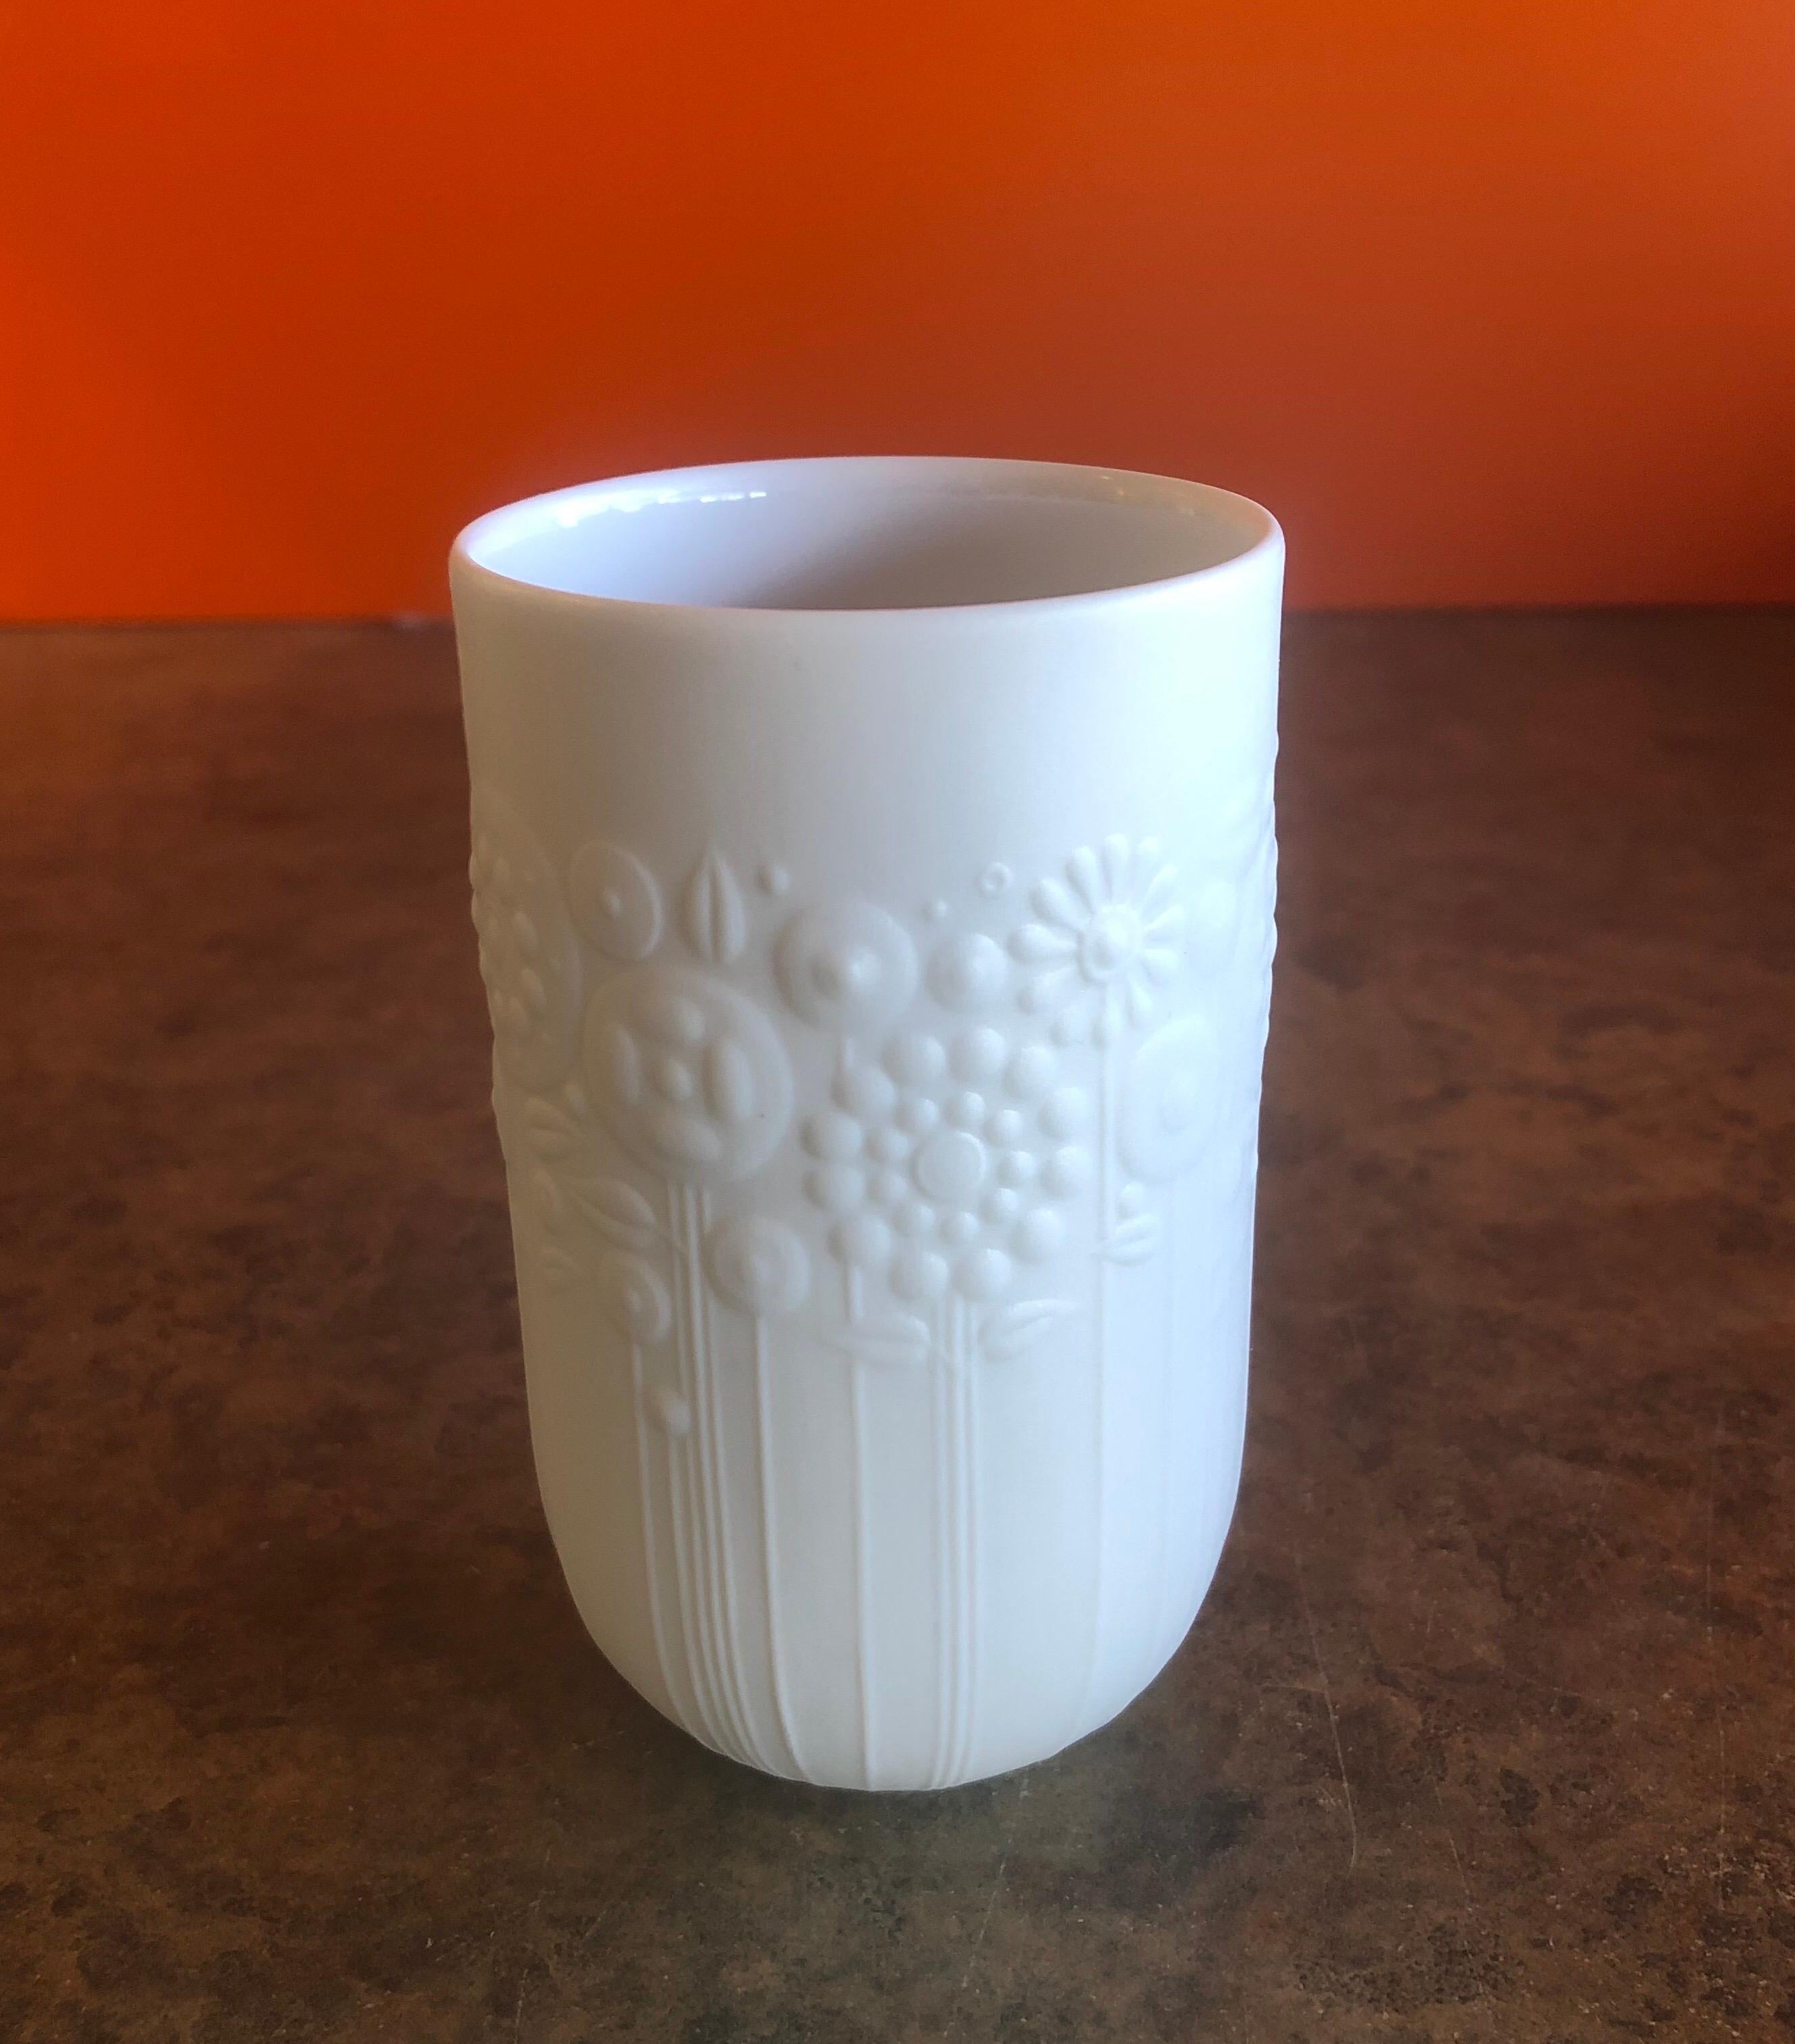 Floral motif Studio Line vase by Bjorn Wiinblad for Rosenthal, circa 1970s. The vase is signed by Danish artist-cum-designer Bjorn Wiinblad for Rosenthal of Germany as part of their extensive artist-led Studio Line series.

The vase is made of